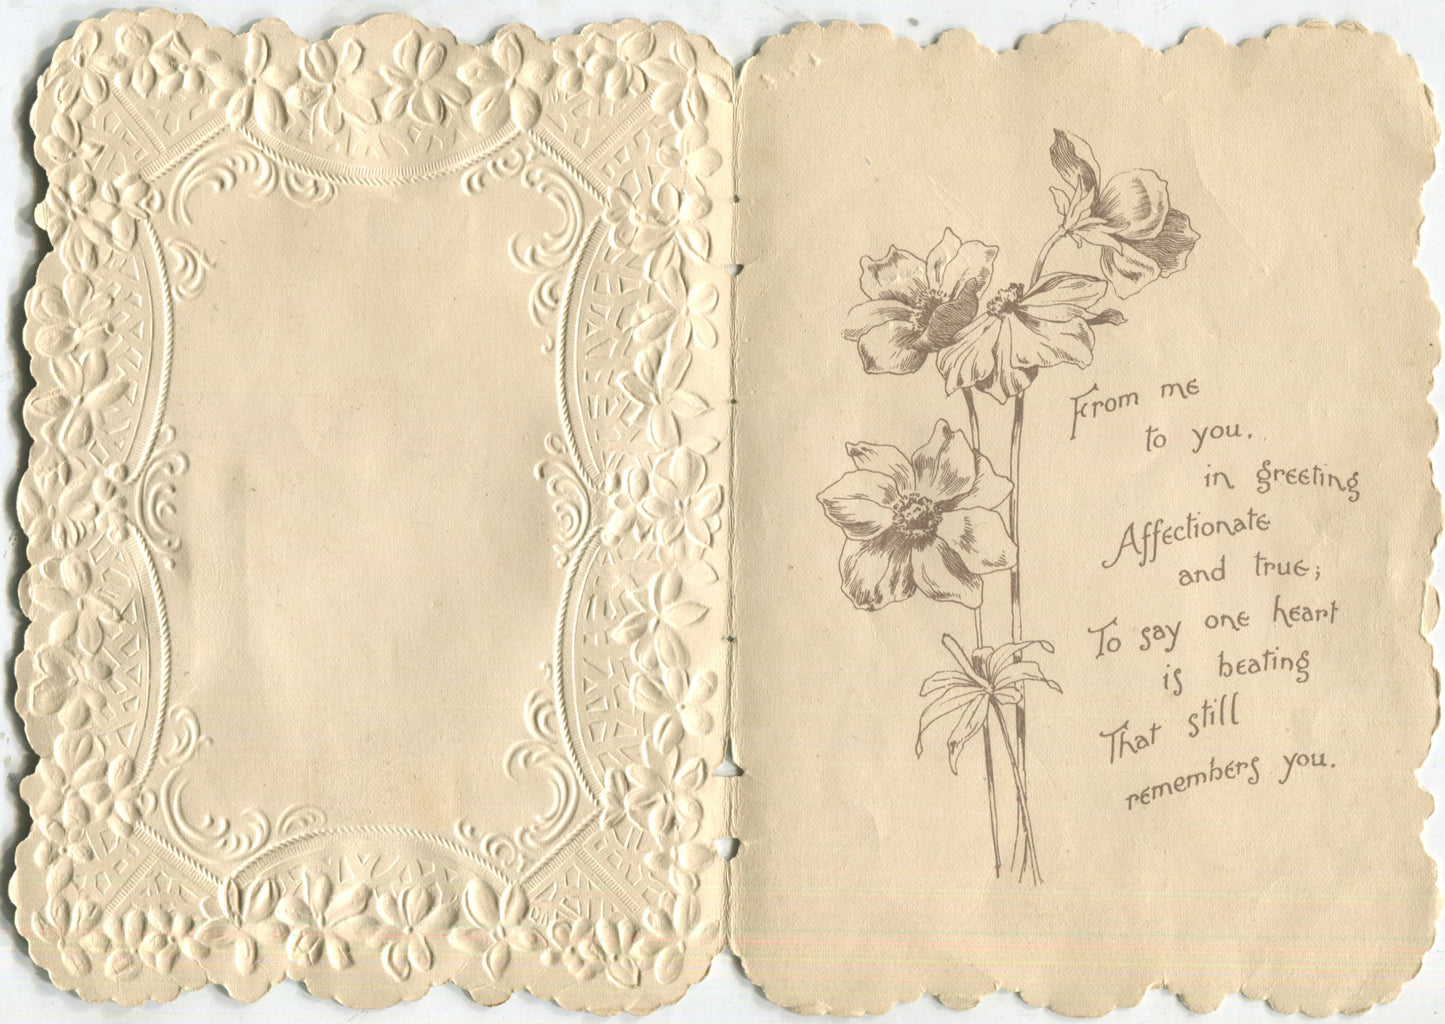 Paper Doily Antique Valentine Greeting Card - "Truly Thine" - 4.5" x 6"